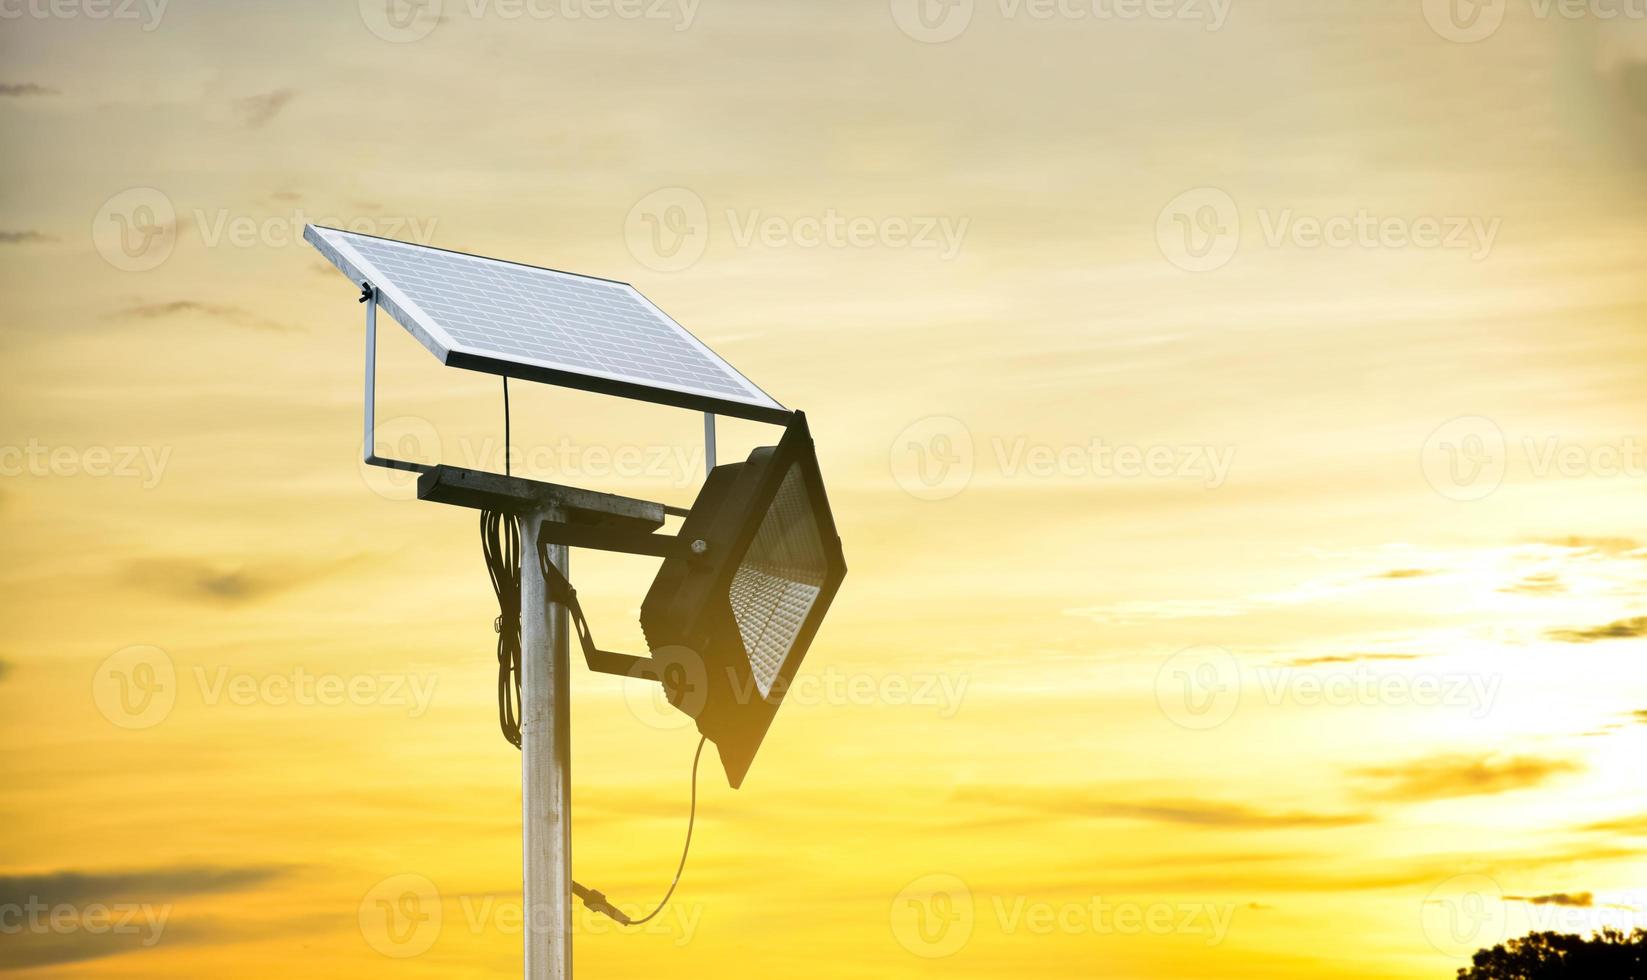 Mini solar or photovoltaic cell panel installed on metal pole with floodlight led, blurr cloudy and bluesky background, concept for using natural energy from the sun in daily life of human. photo